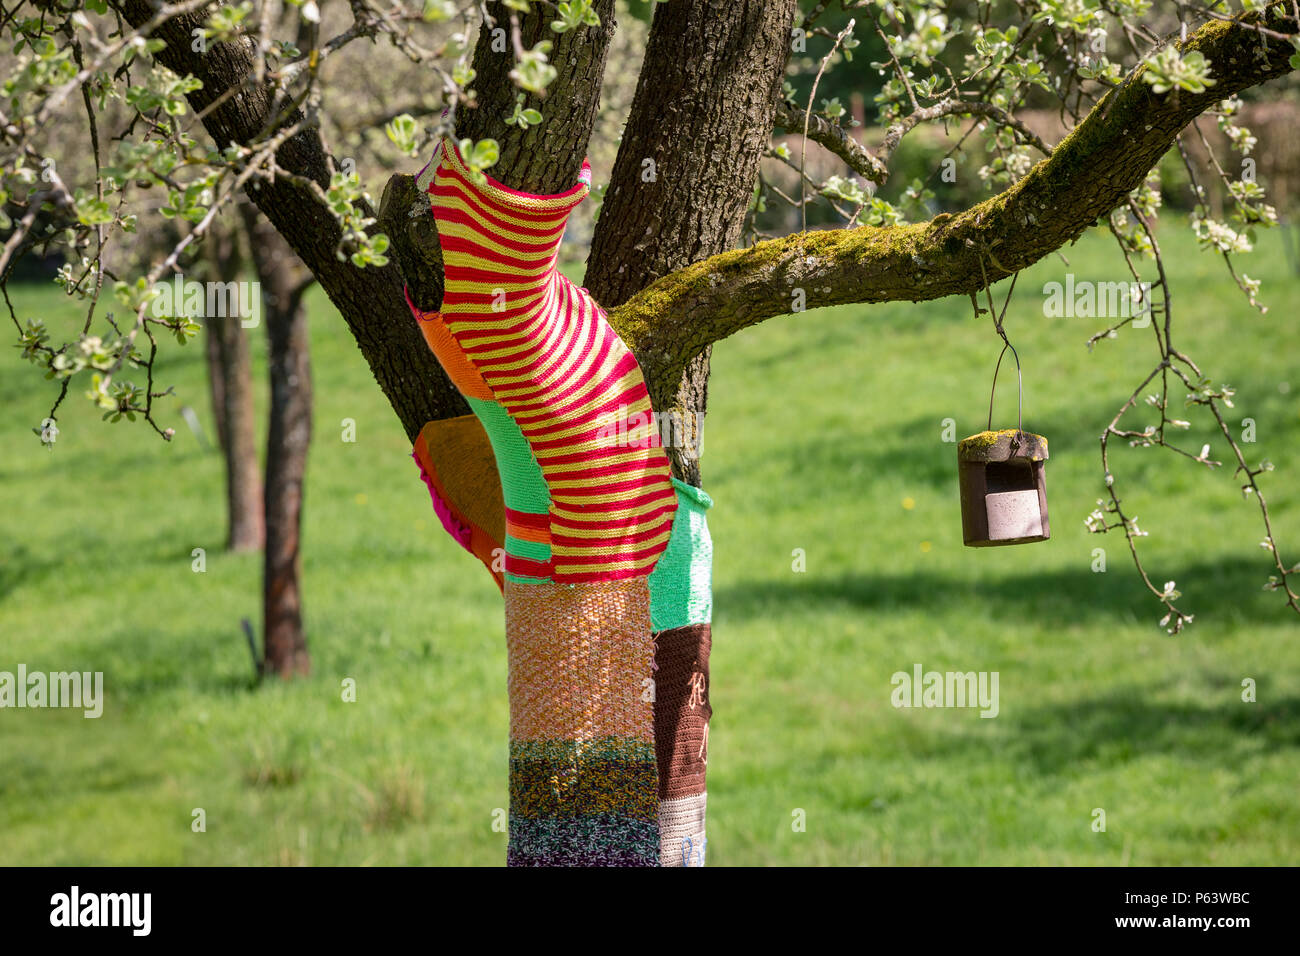 Yarn bombing or yarnbombing: a blossoming tree trunk with colourful knitting decoration. Stock Photo